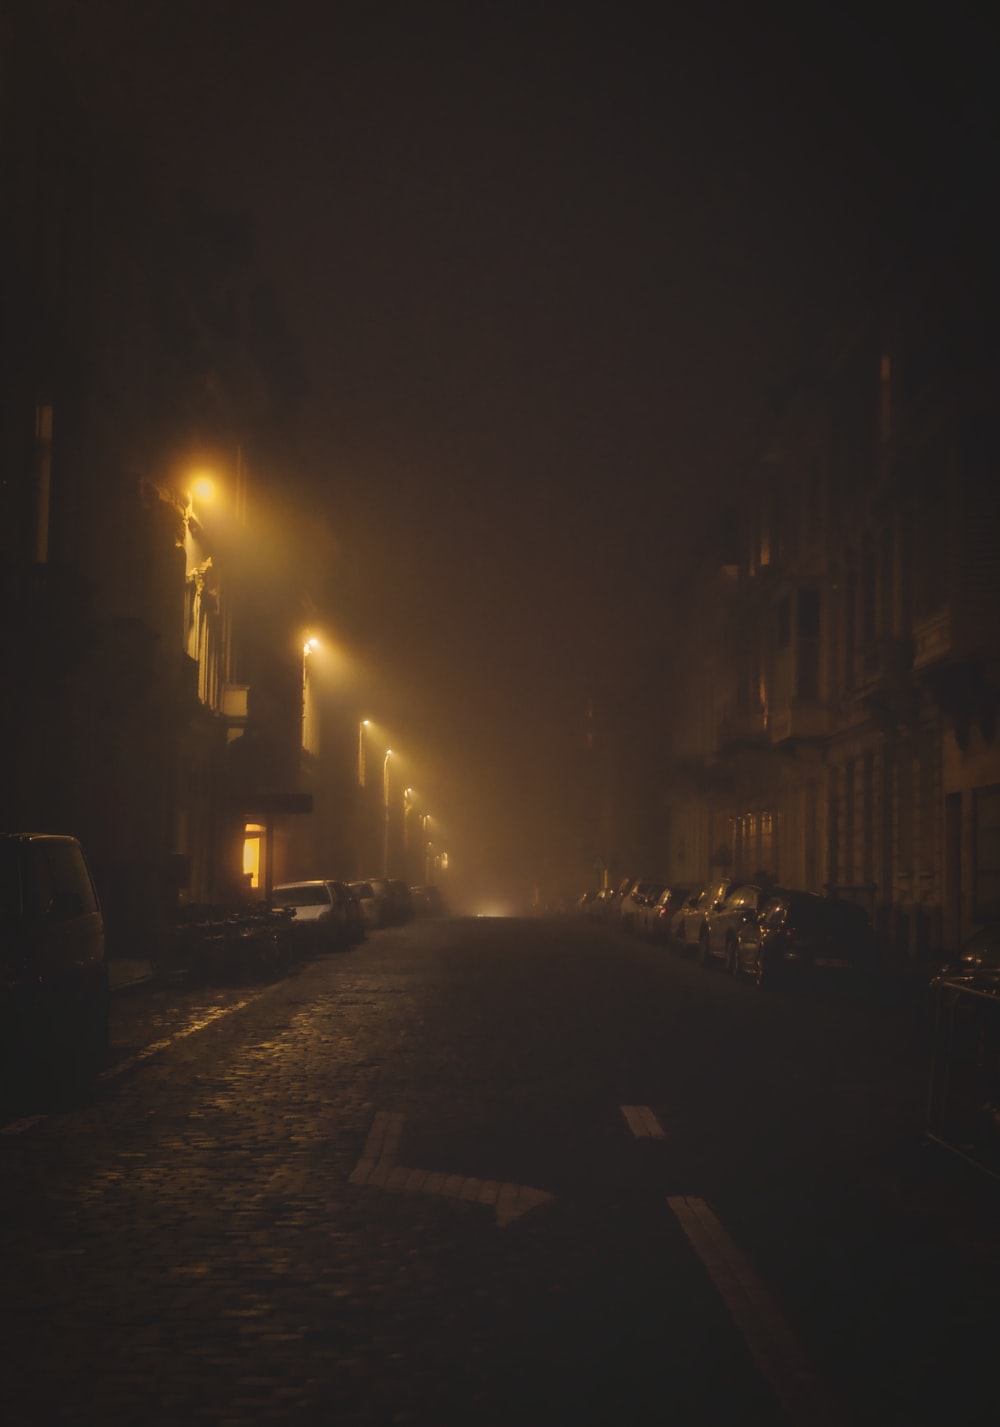 Lonely Road At Night Wallpapers